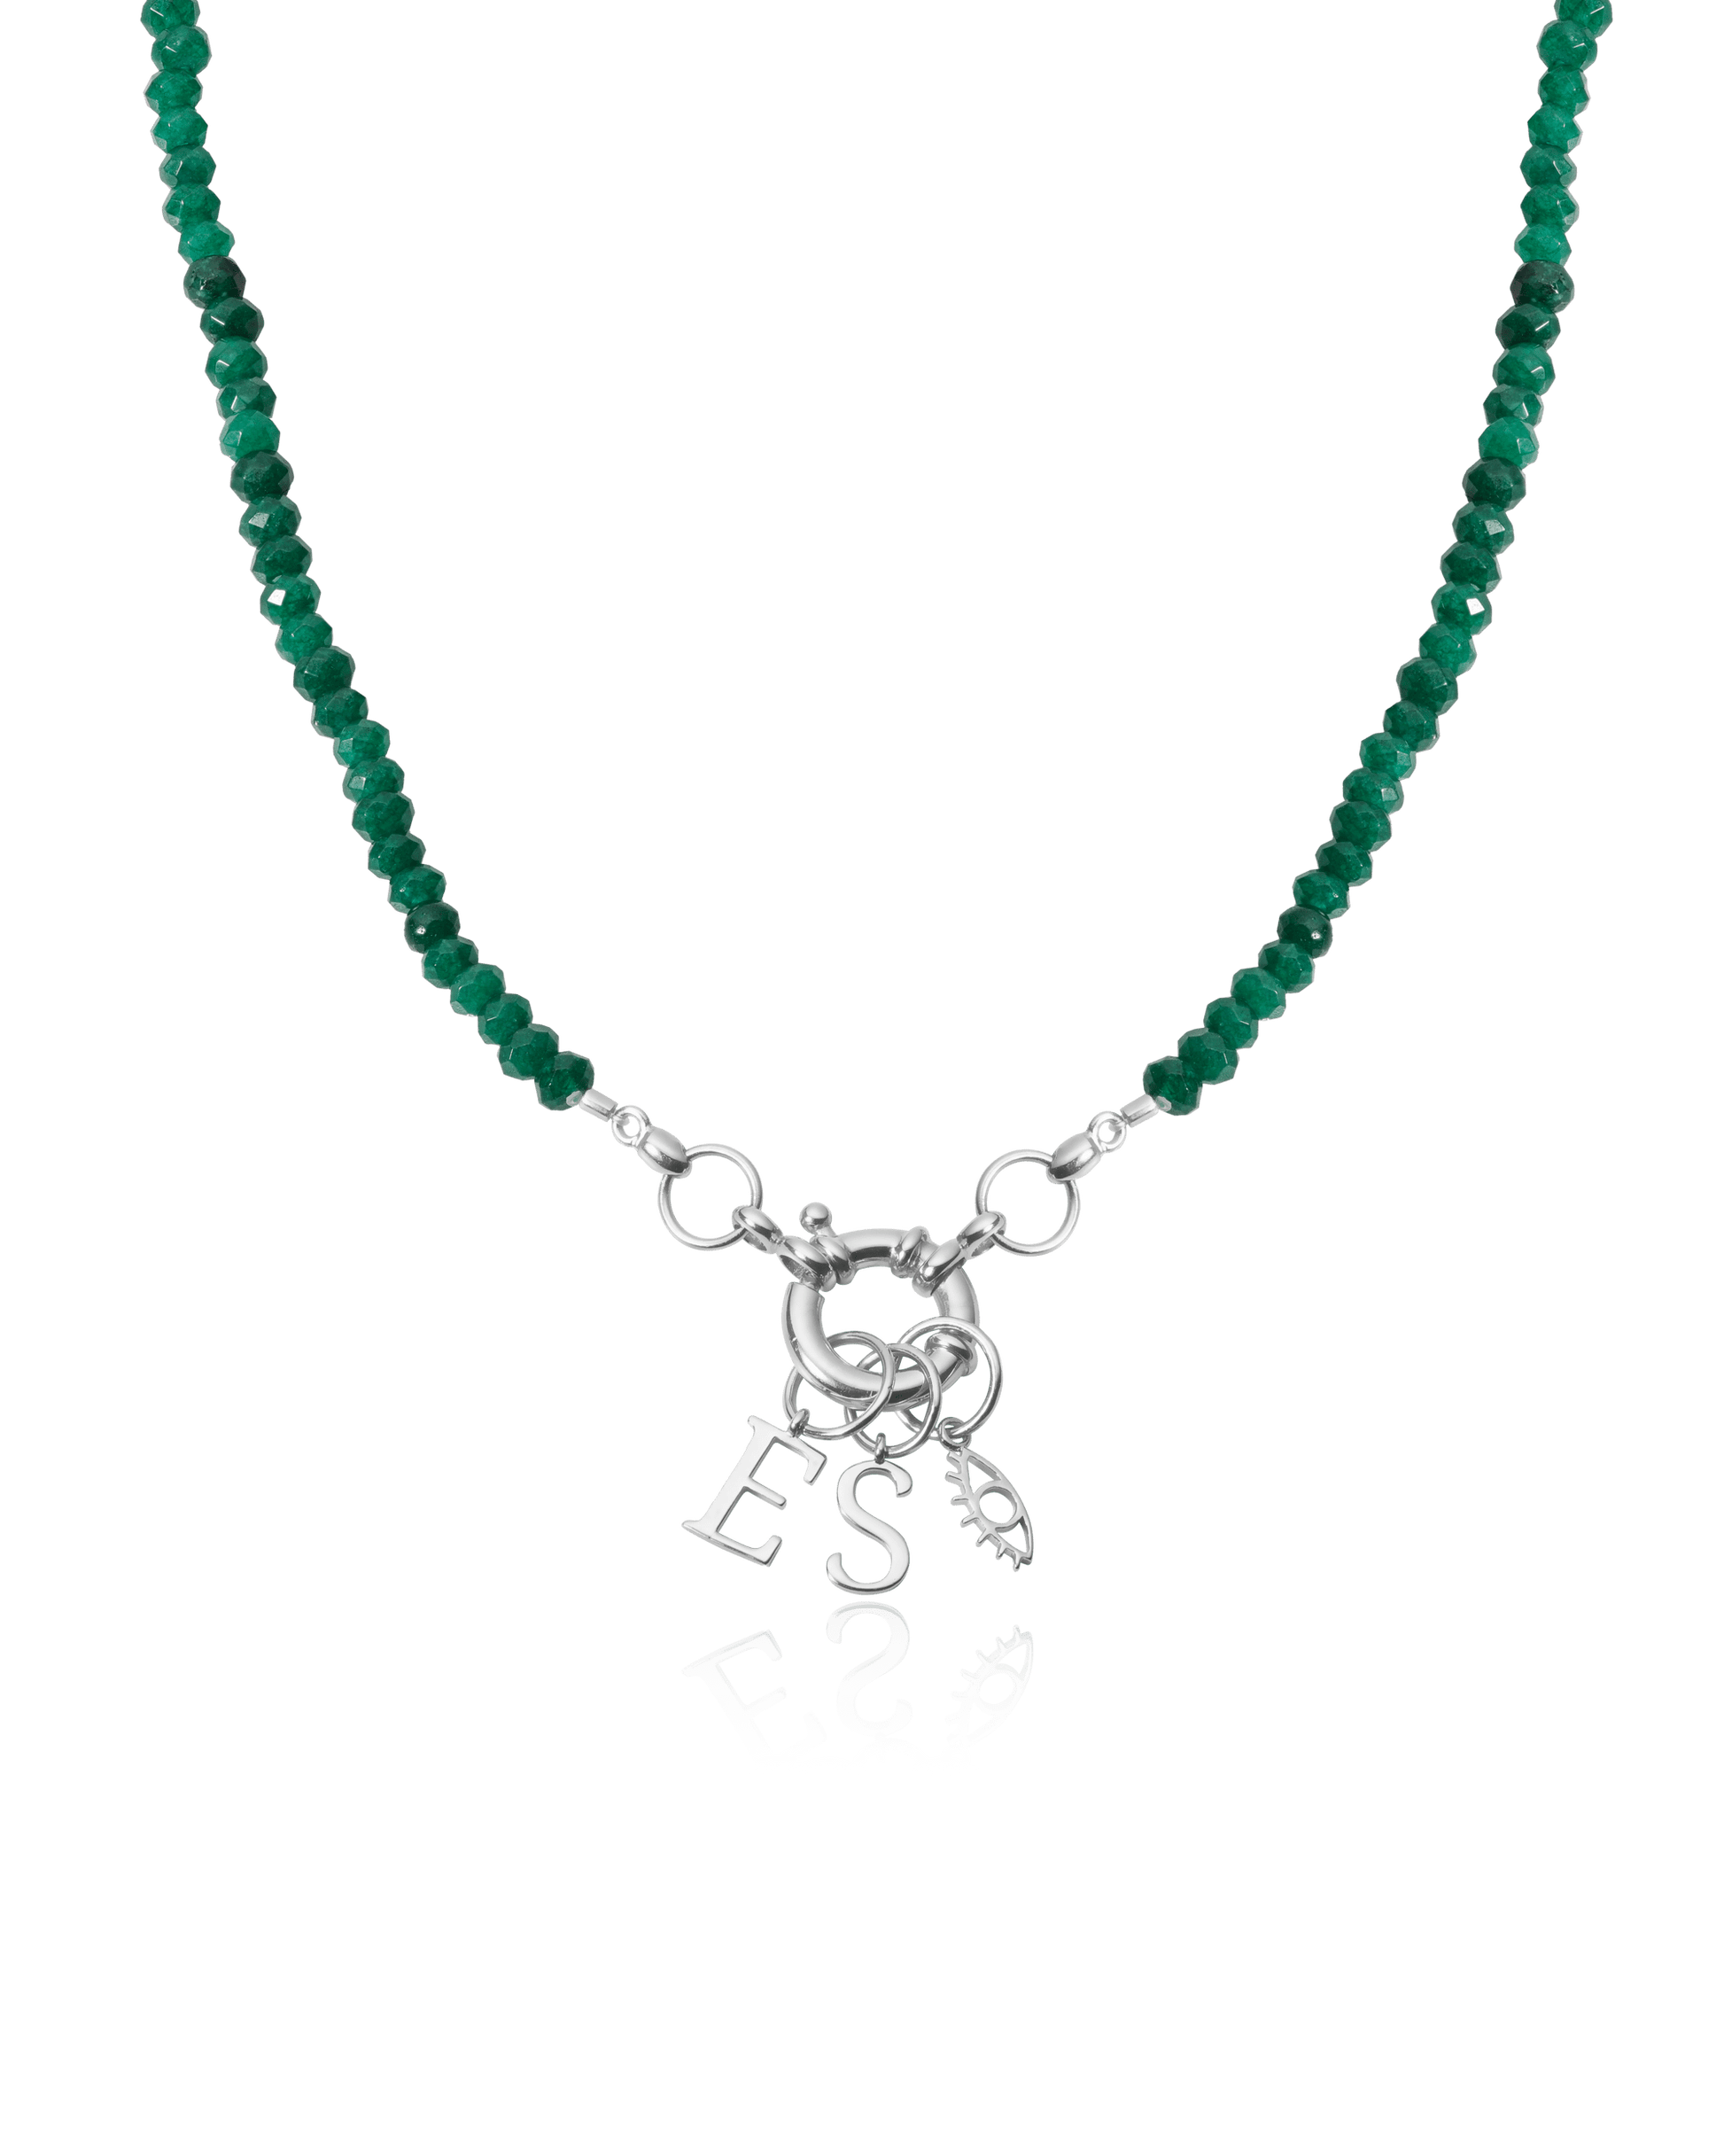 Watermelon Charm Lock Necklace - 925 Sterling Silver Necklaces magal-dev Green Jade Gemstones 1 Charm 16"